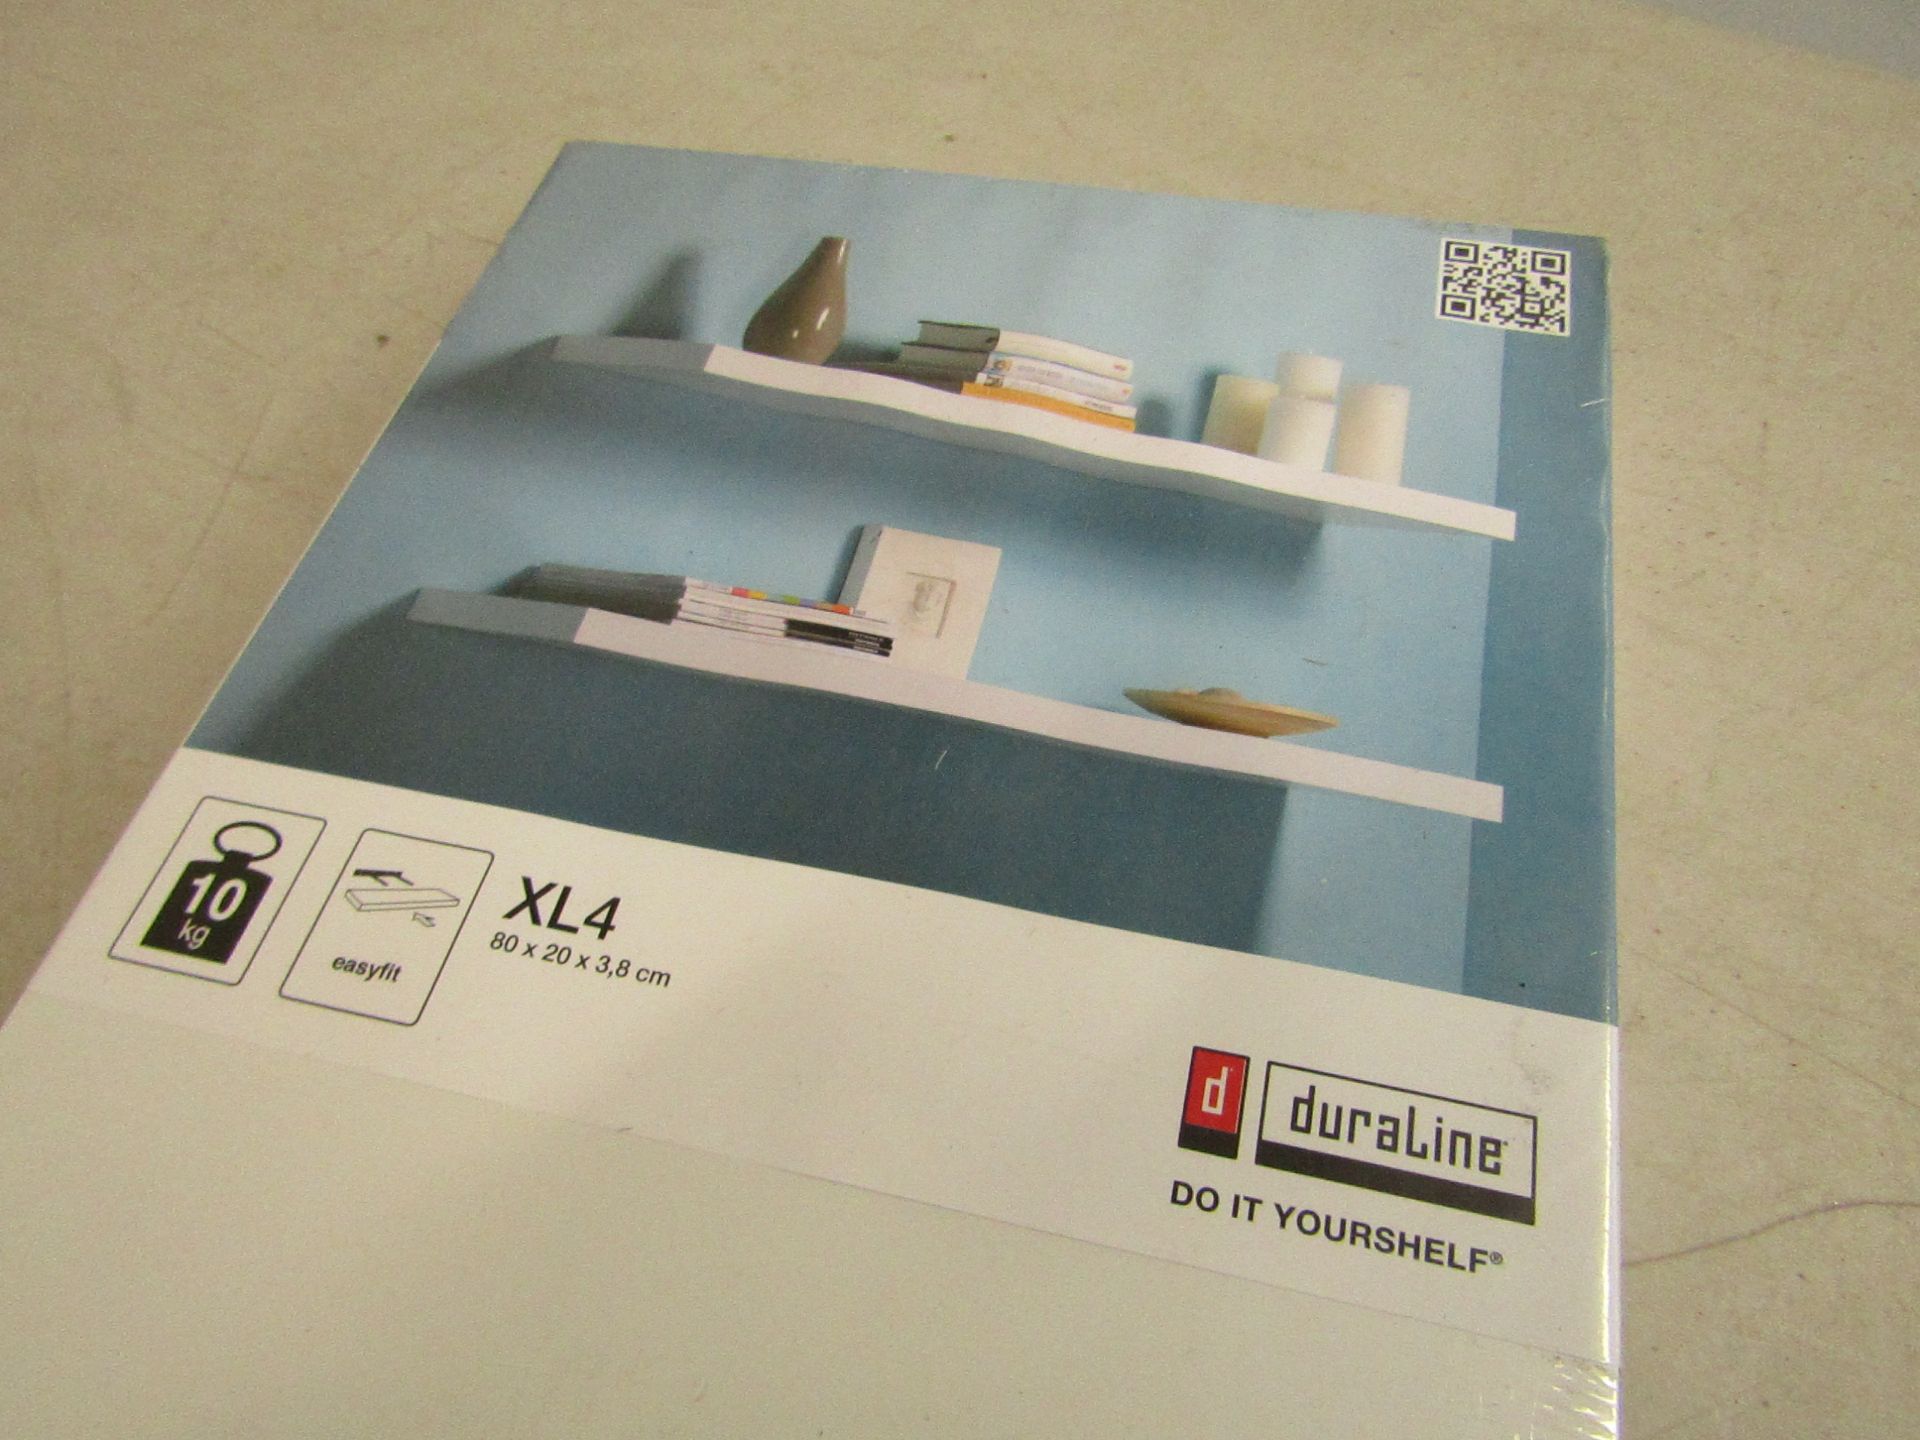 DuraLine 80x20x3.8cm floating shelf, new and packaged.